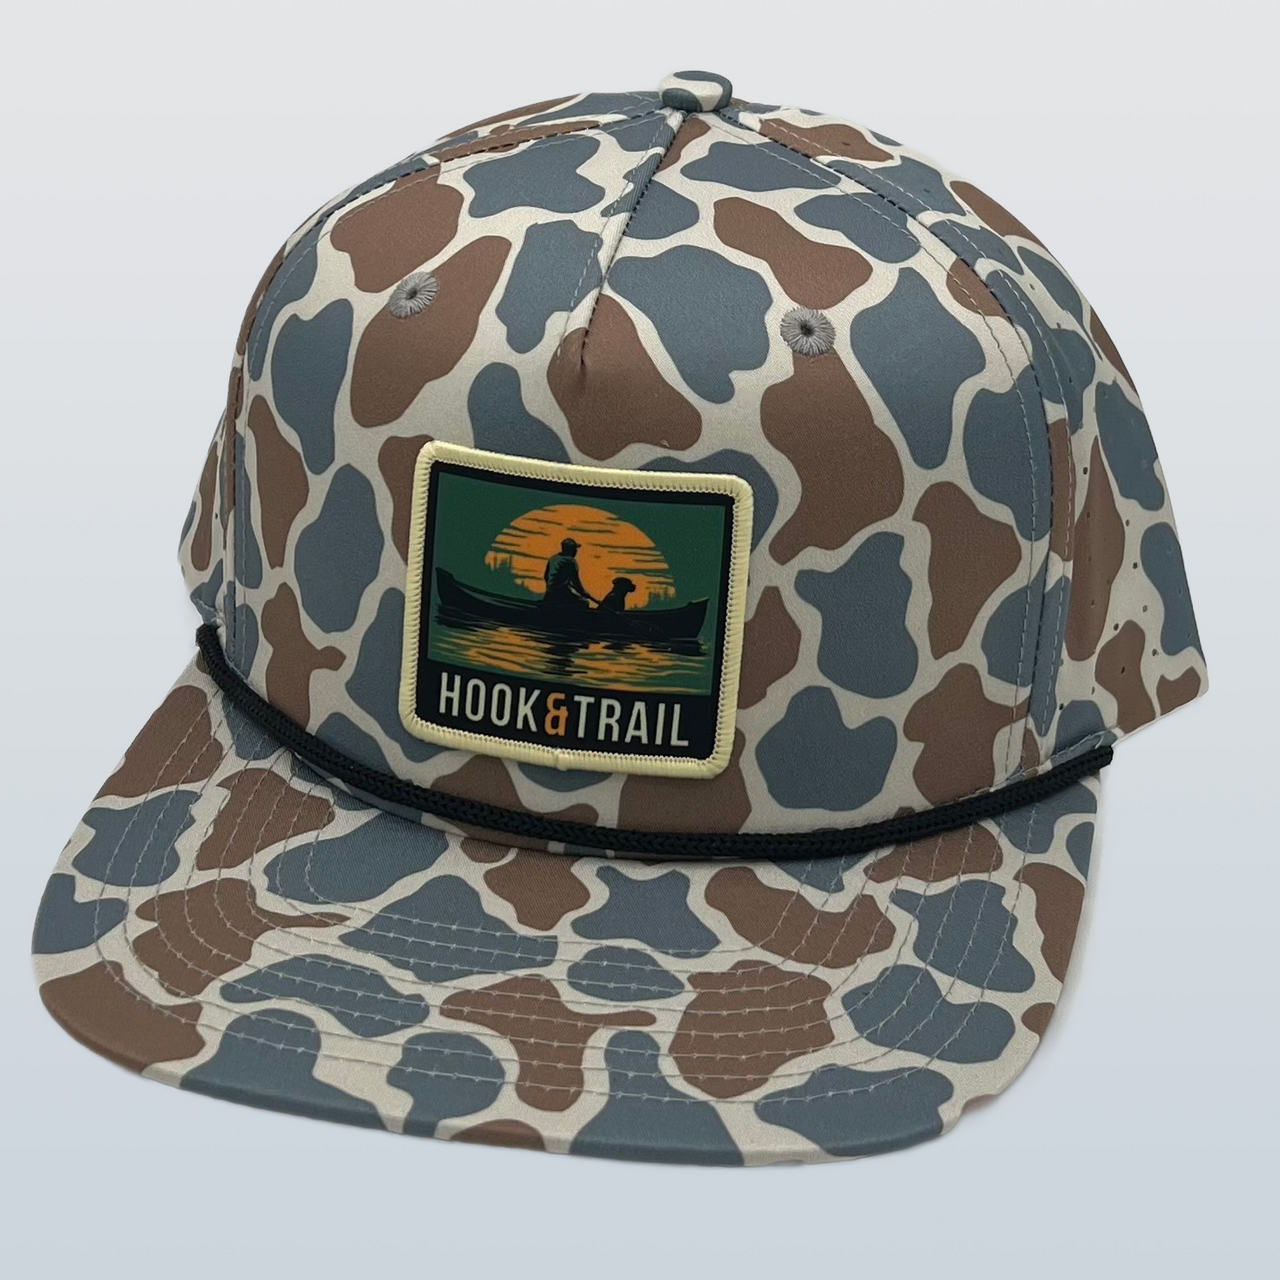  "Hook & Trail Canoe Patch Performance Cap in Blue Old School Camo, featuring a nostalgic camo pattern with vibrant blue tones. The cap showcases an embroidered canoe patch, symbolizing outdoor exploration. Made from moisture-wicking material for comfort and breathability, with an adjustable strap for a perfect fit. Ideal for outdoor enthusiasts seeking style and functionality in every adventure."